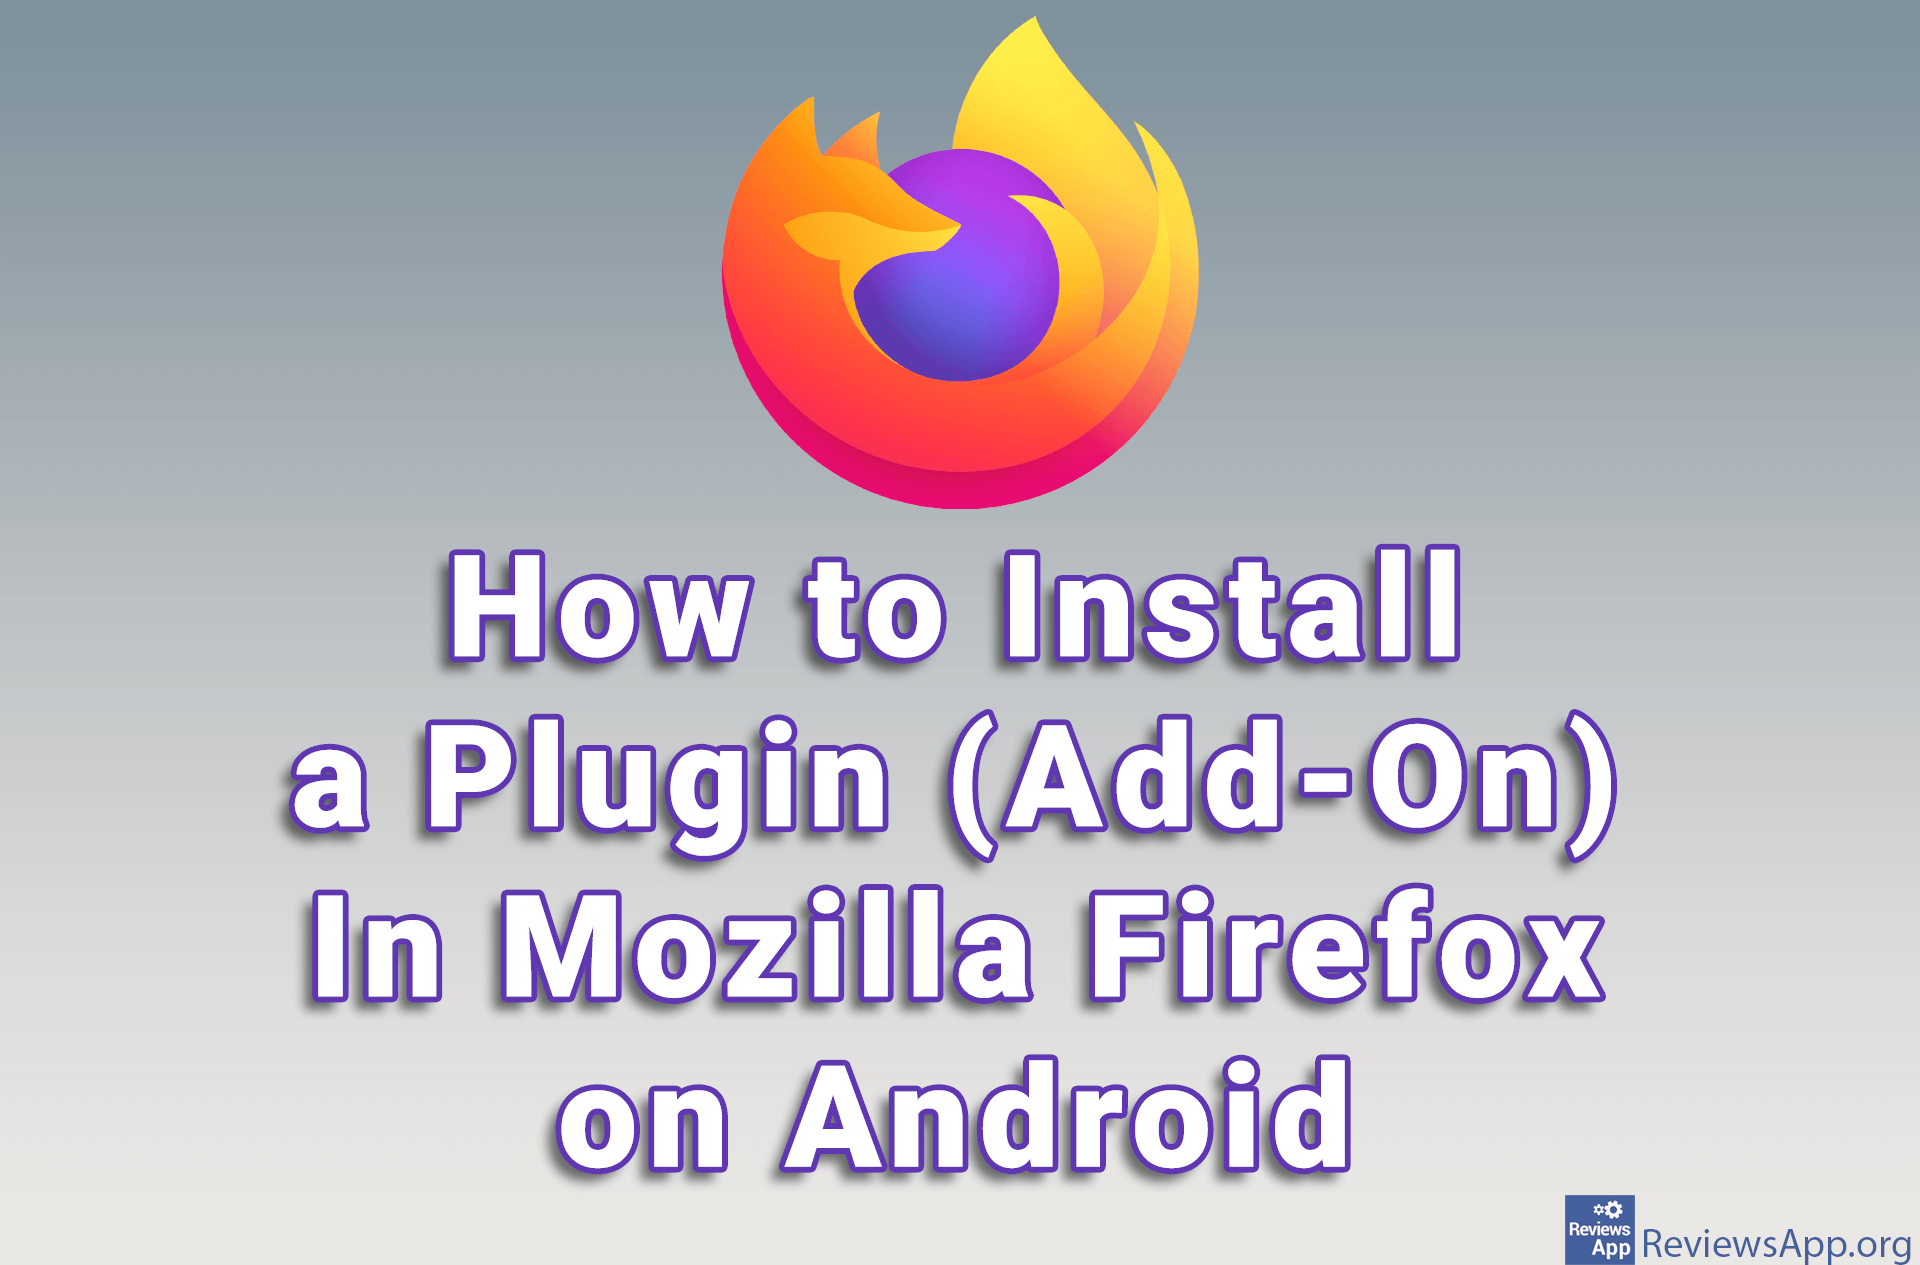 How to Install a Plugin (Add-On) In Mozilla Firefox on Android